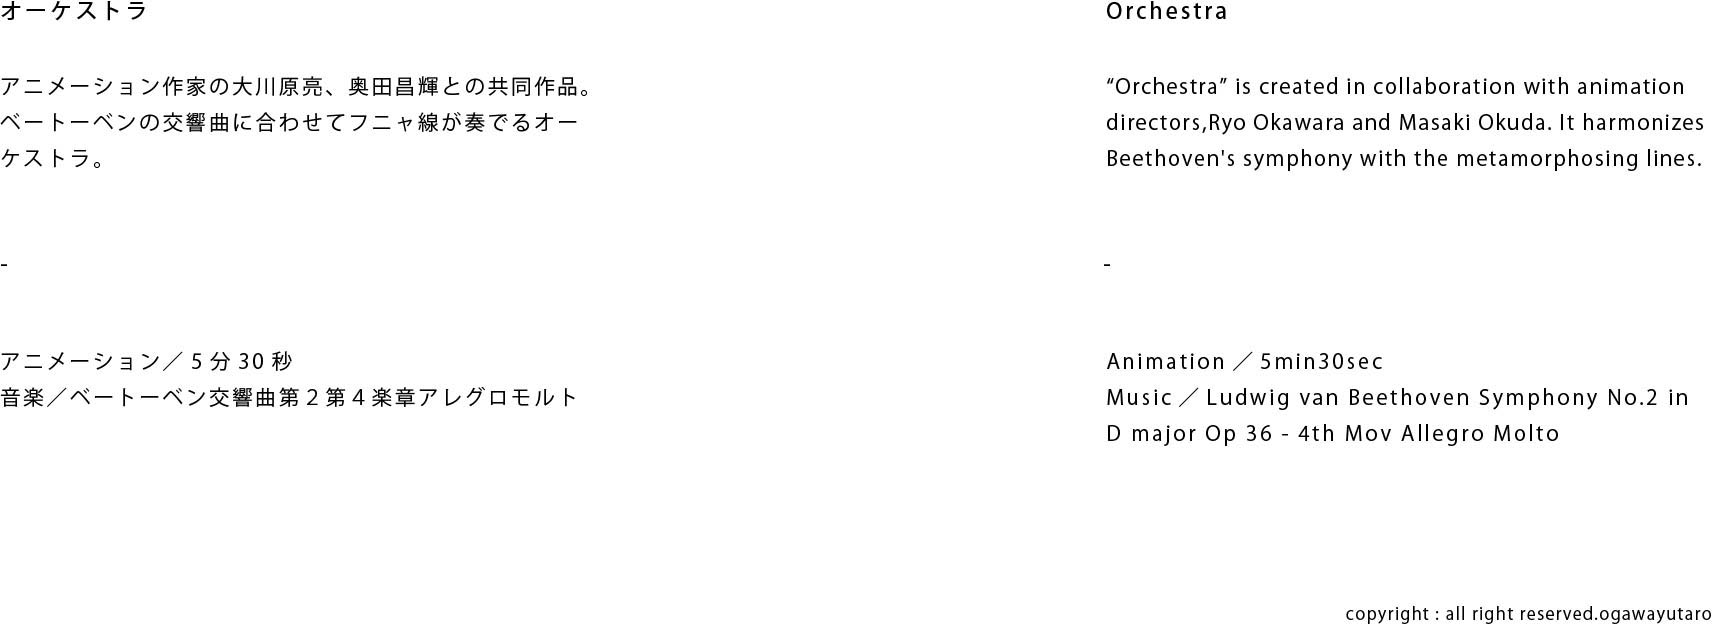 orchestra_text